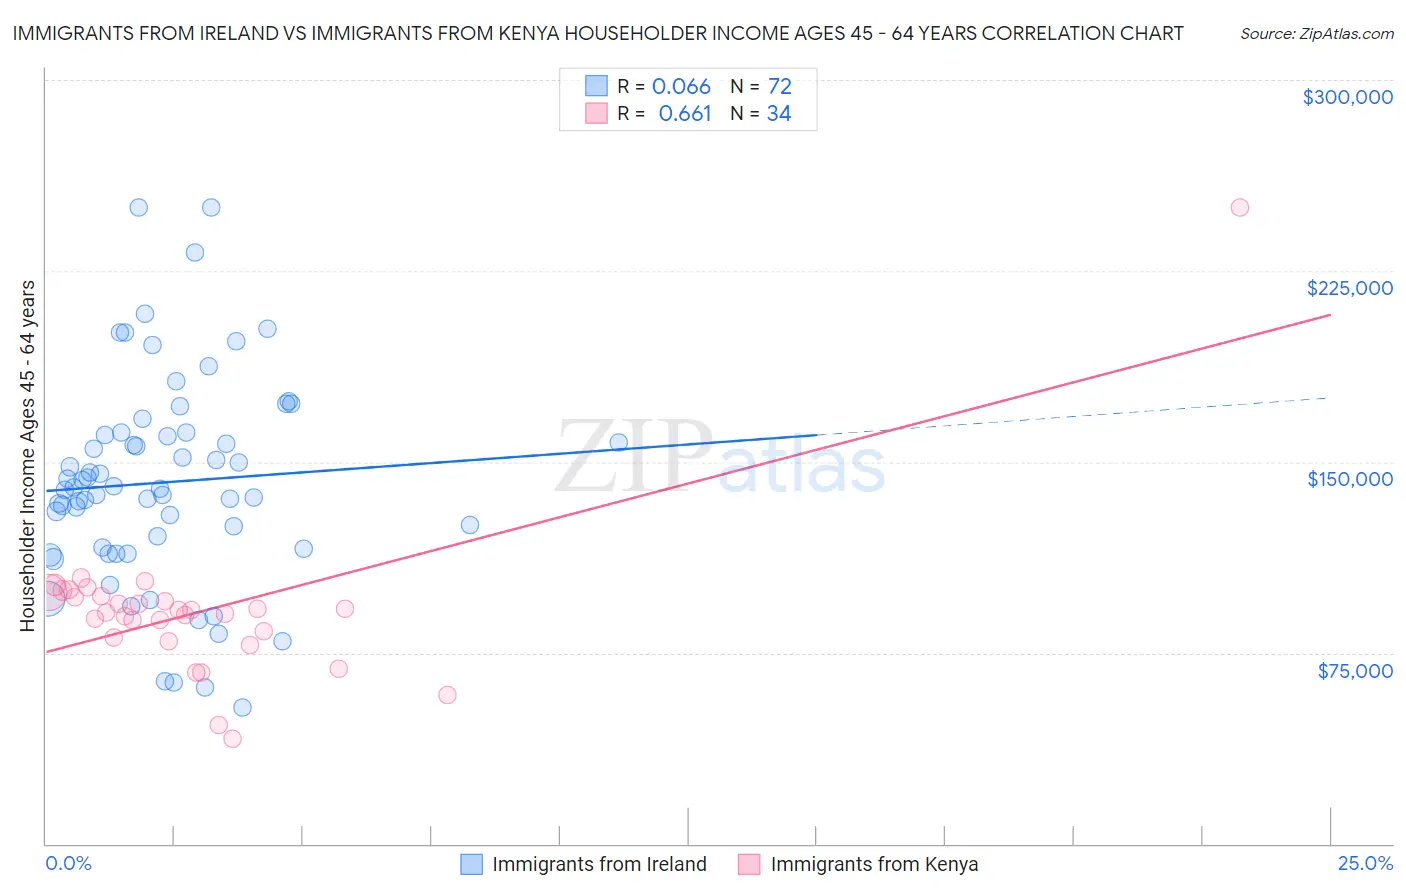 Immigrants from Ireland vs Immigrants from Kenya Householder Income Ages 45 - 64 years